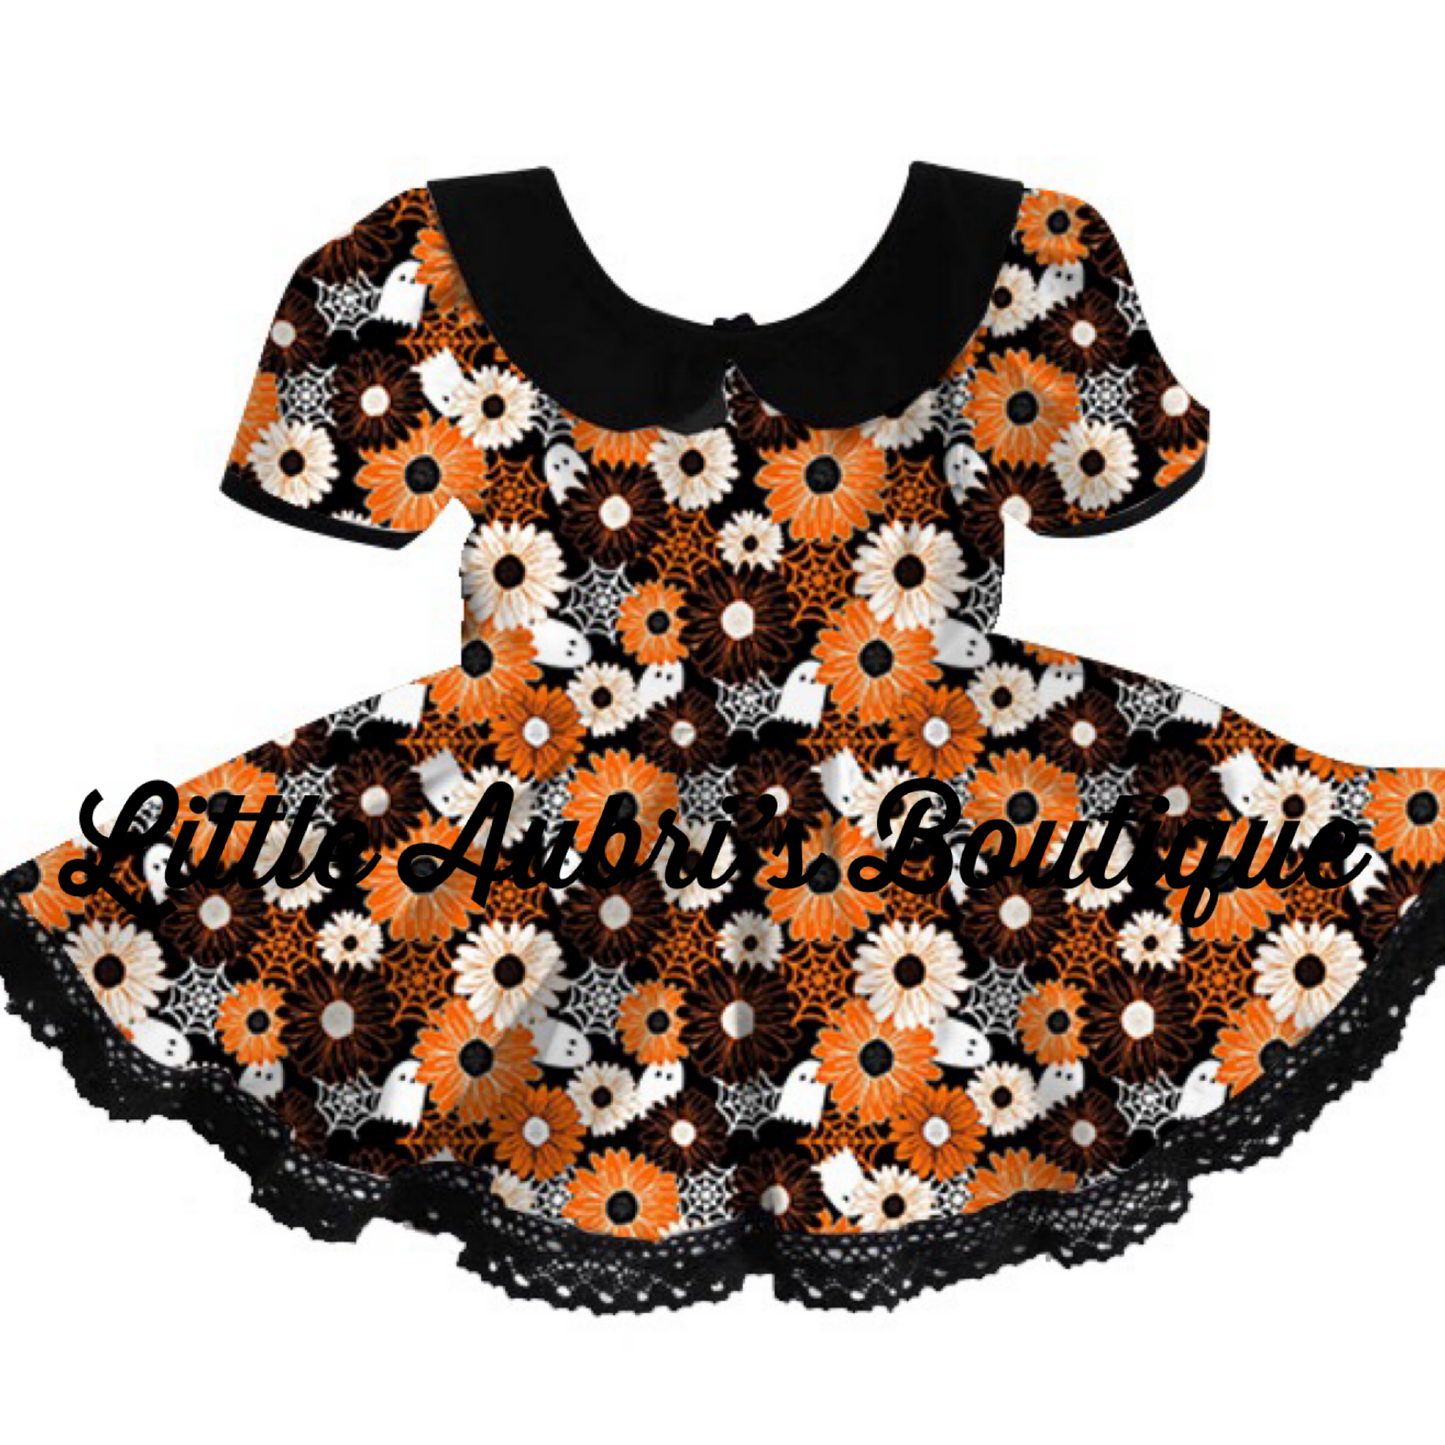 PREORDER Vintage Collar Spooky Floral Lace Dress CLOSES 6/27